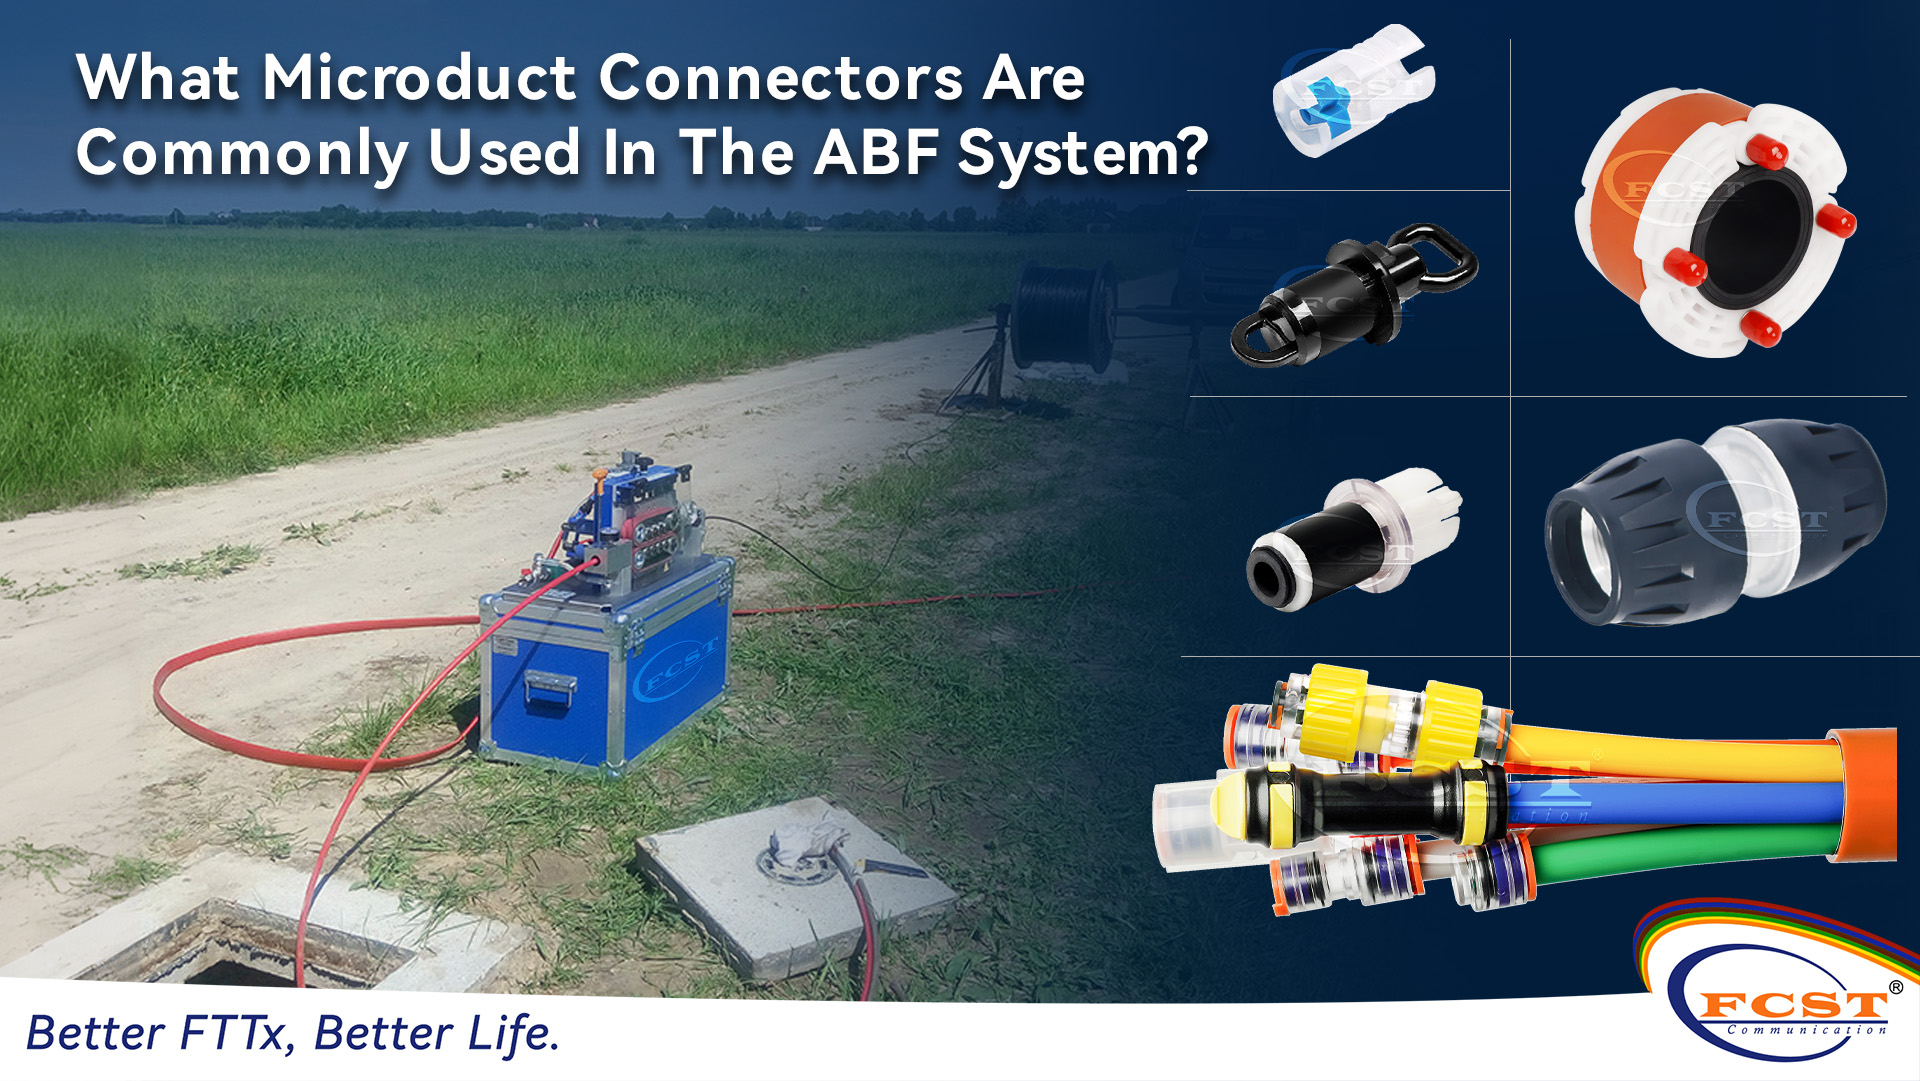 What Microduct Connectors Are Commonly Used In The ABF System?